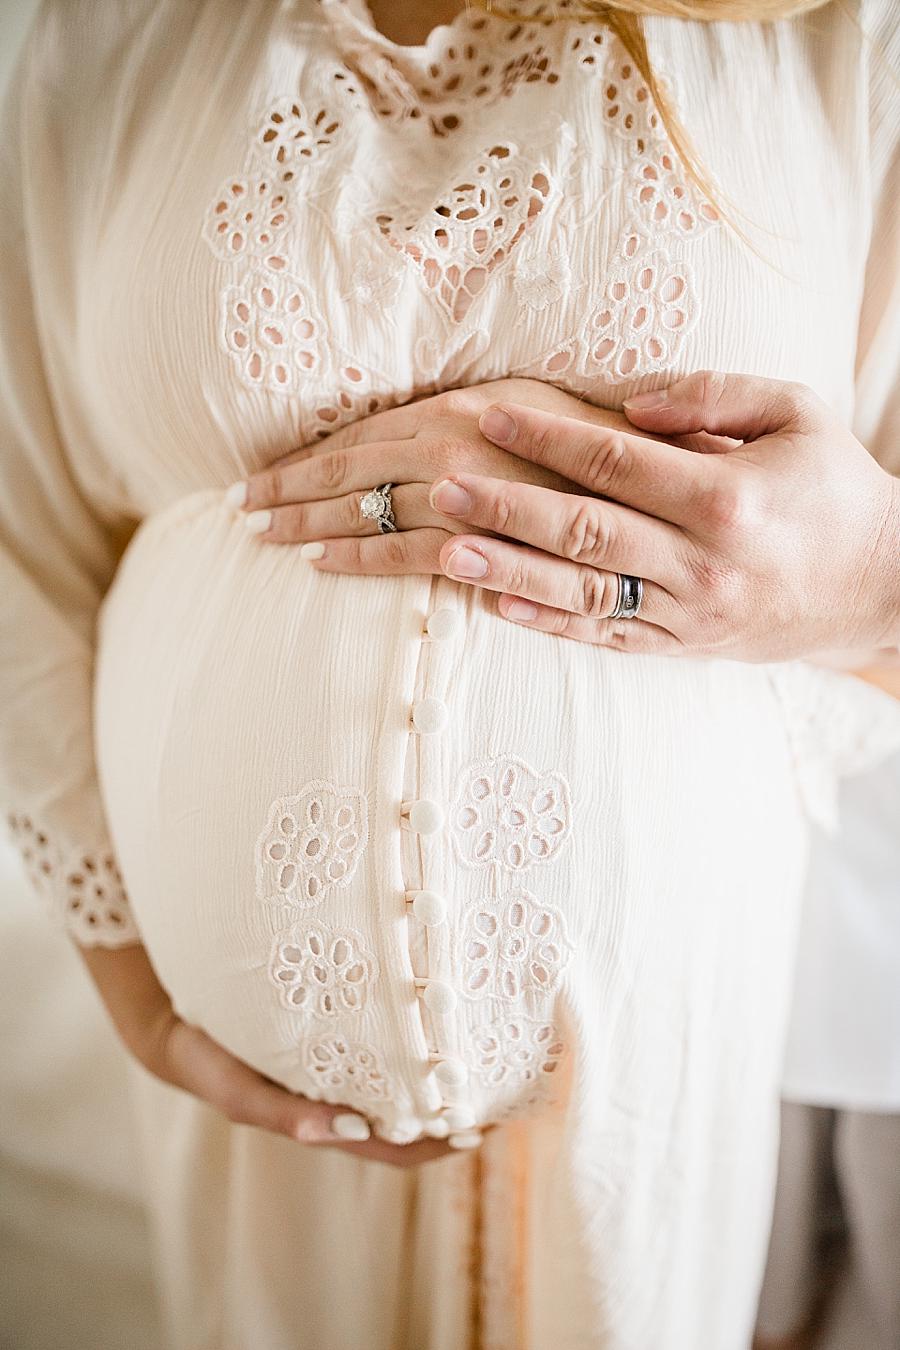 The belly at this Lifestyle Maternity Session by Knoxville Wedding Photographer, Amanda May Photos.